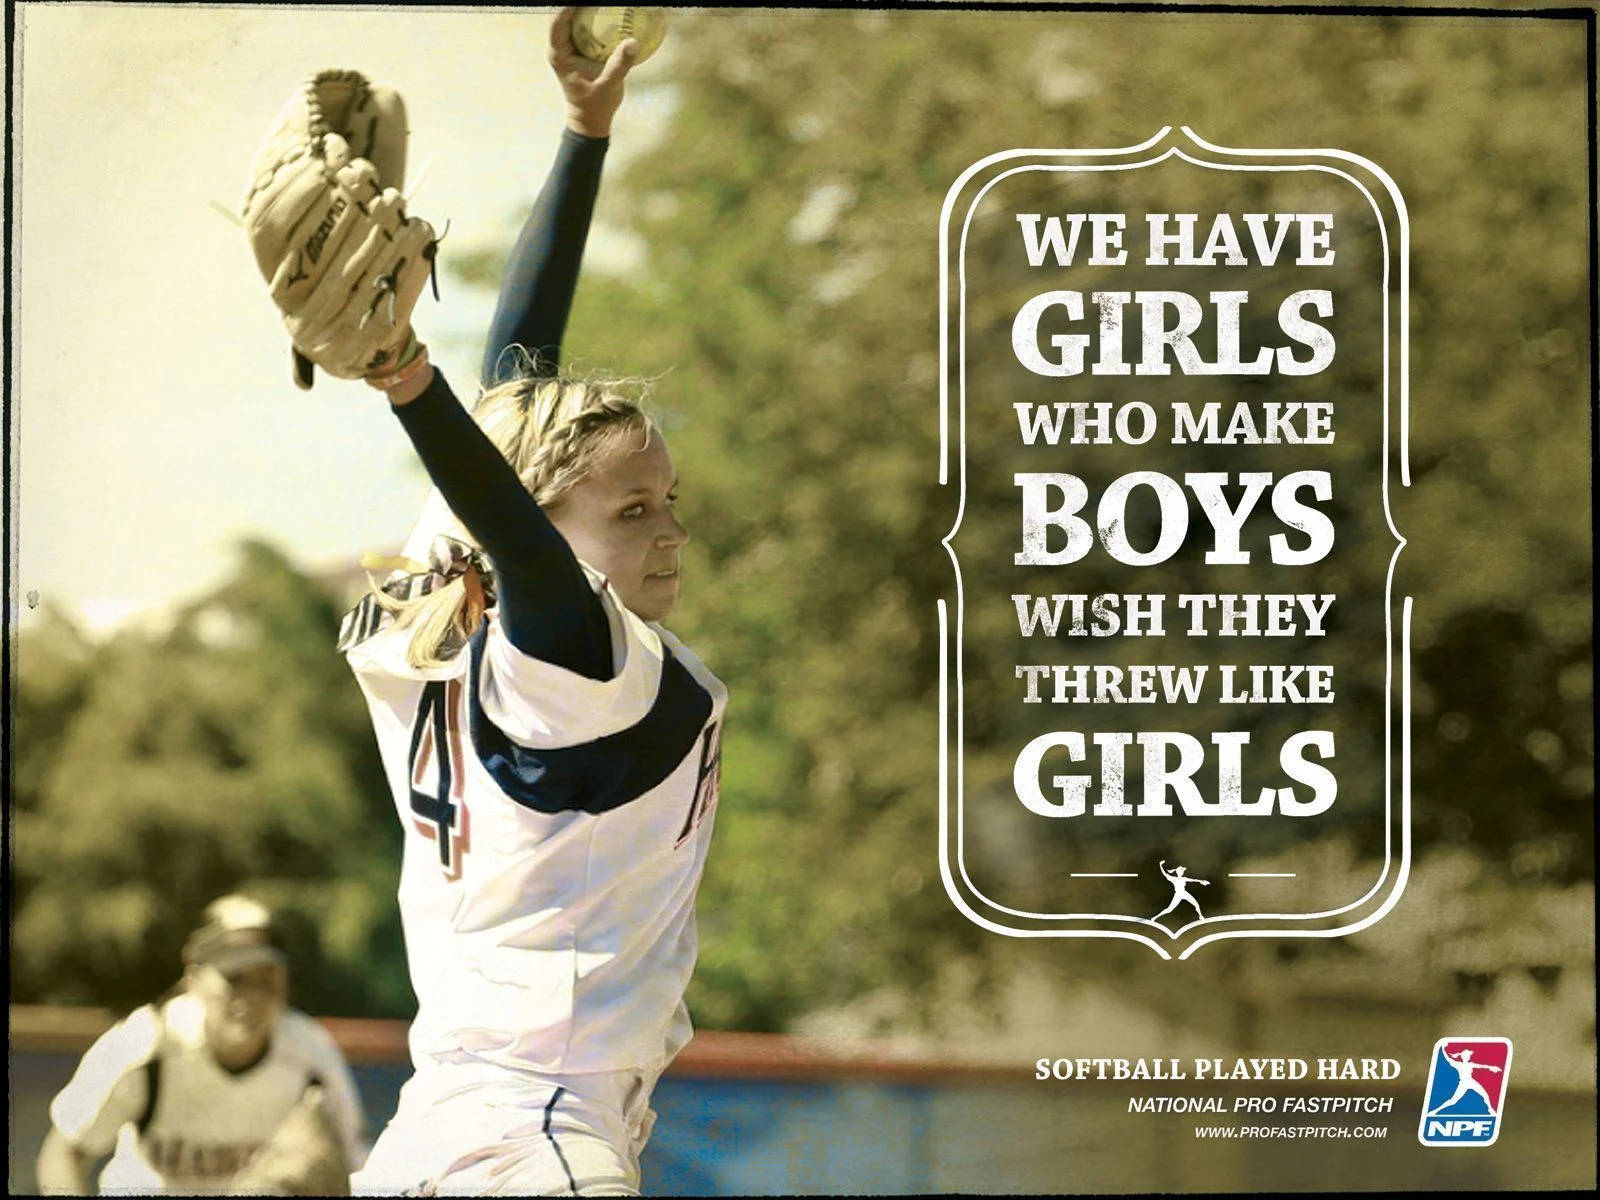 Wallpaper Softball Quotes Wallpapers